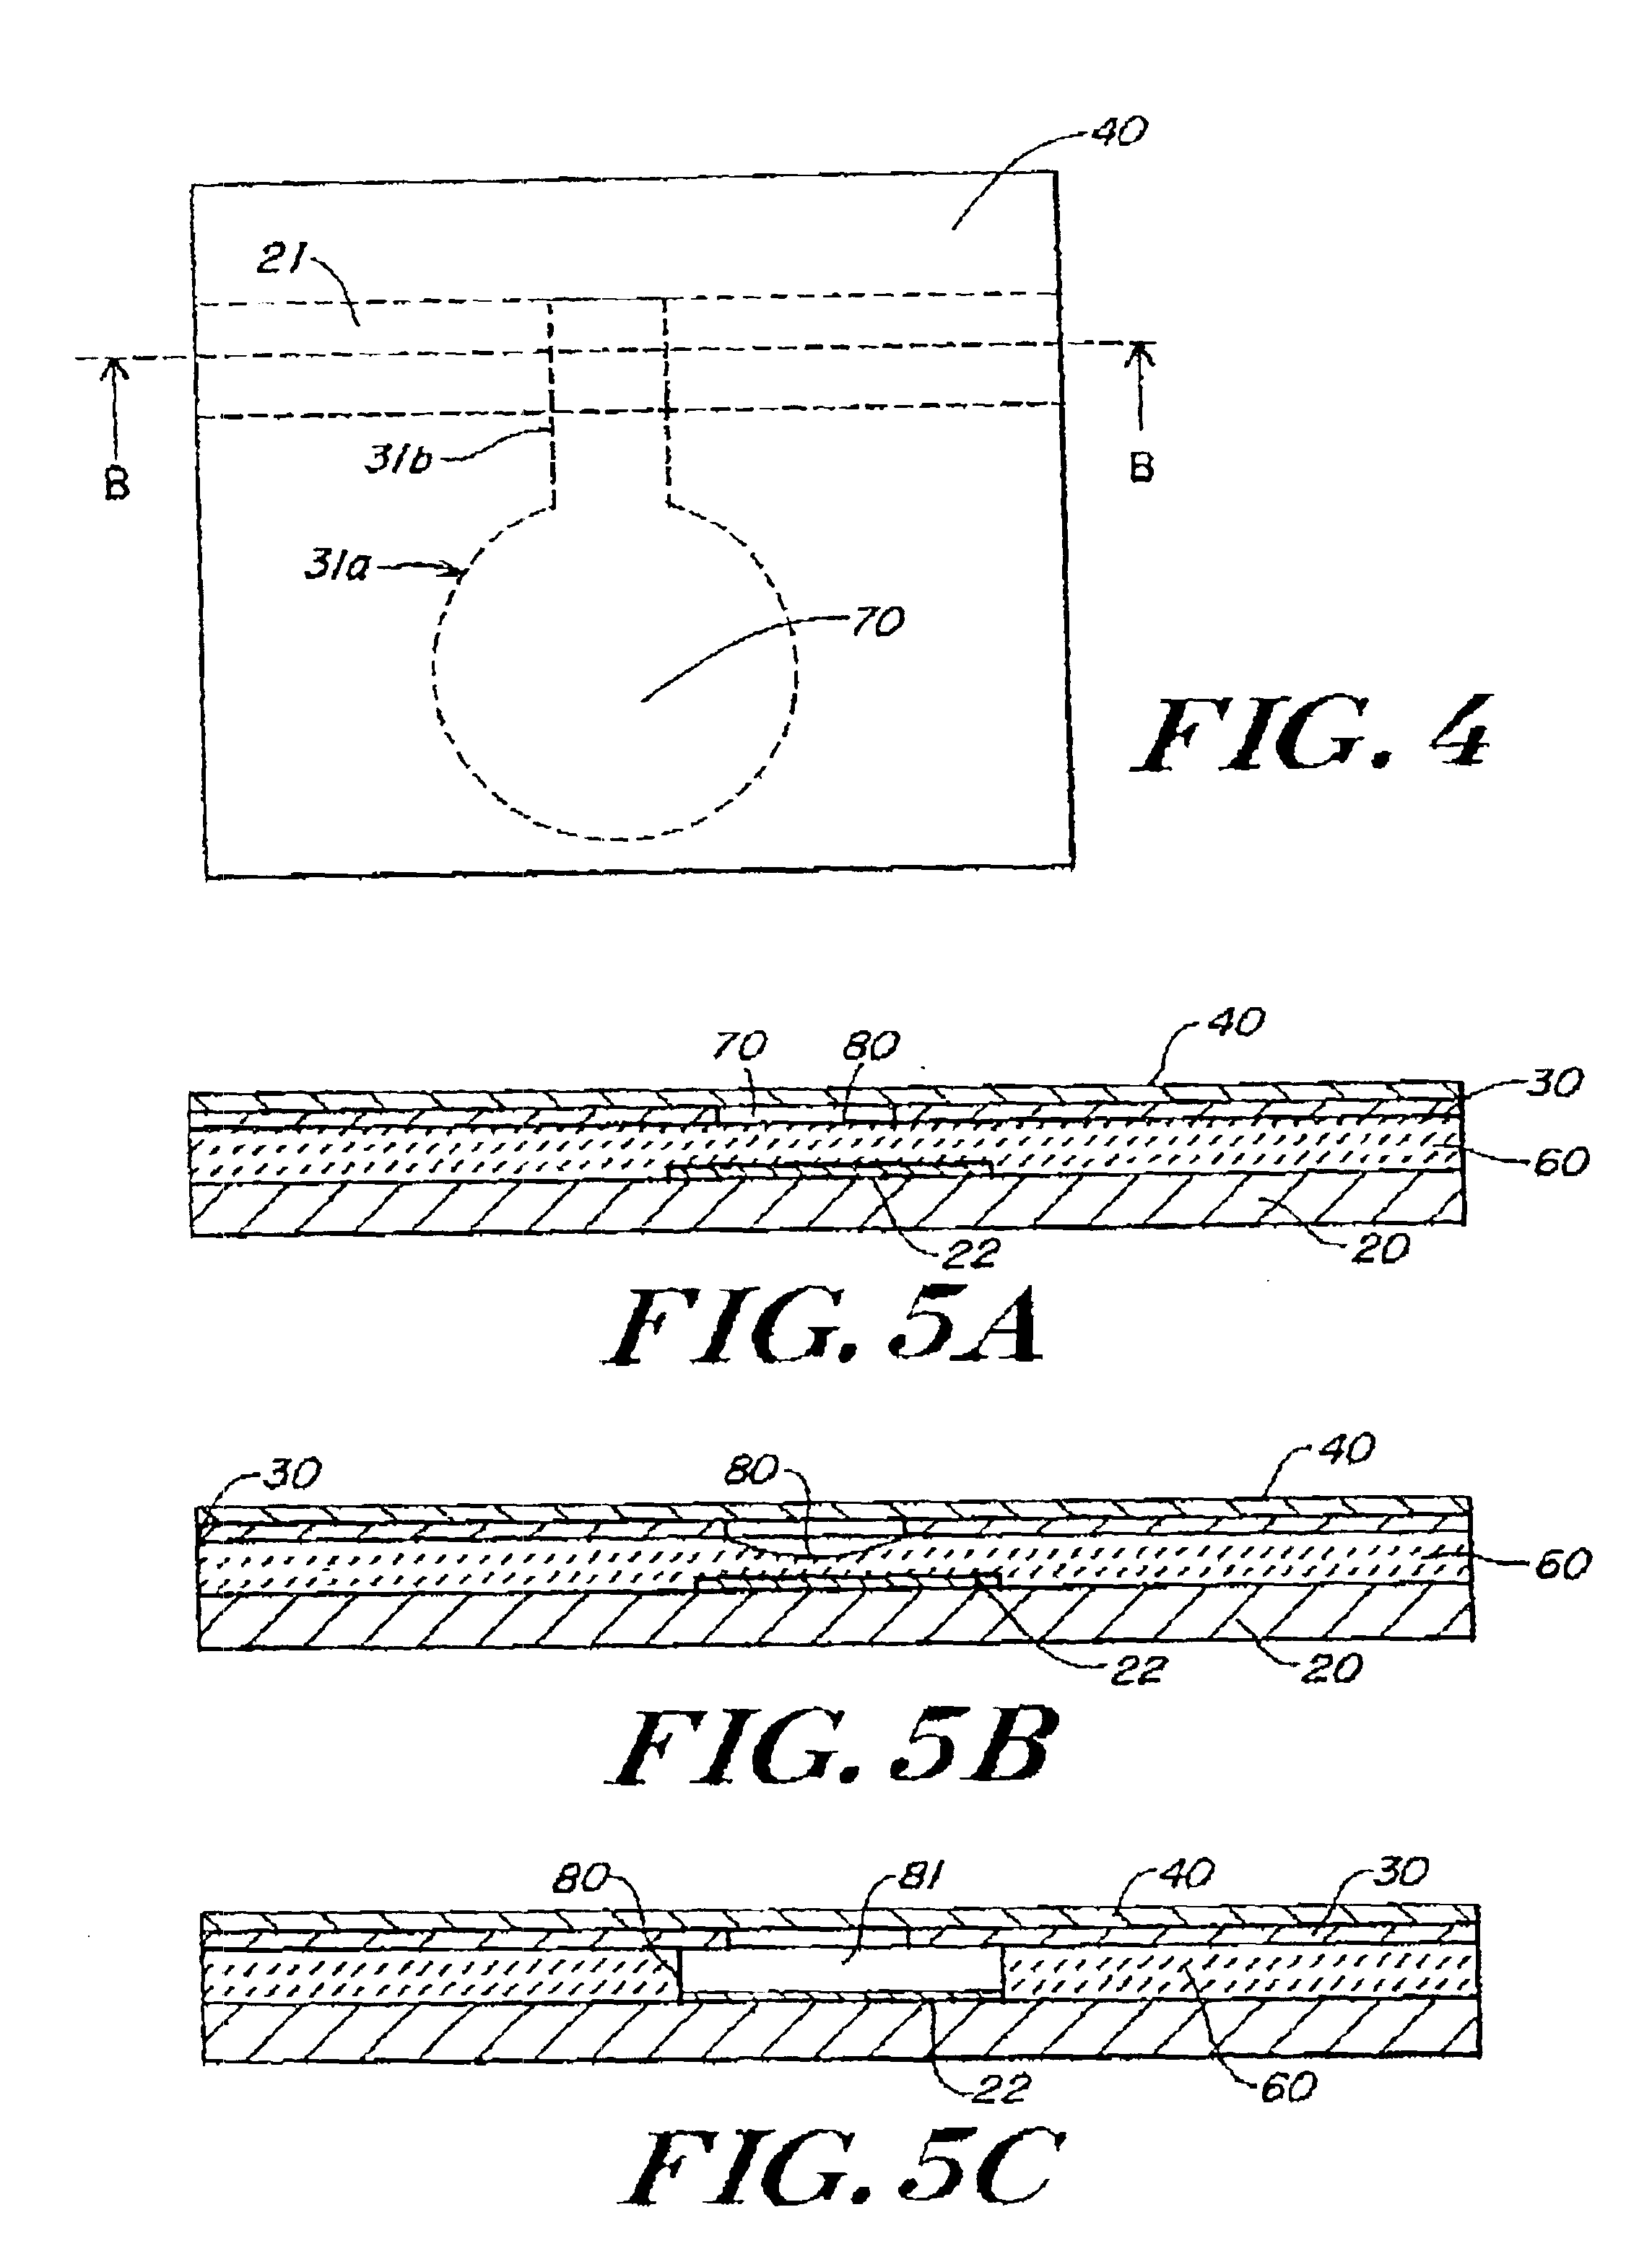 Microfluidic system including a bubble valve for regulating fluid flow through a microchannel